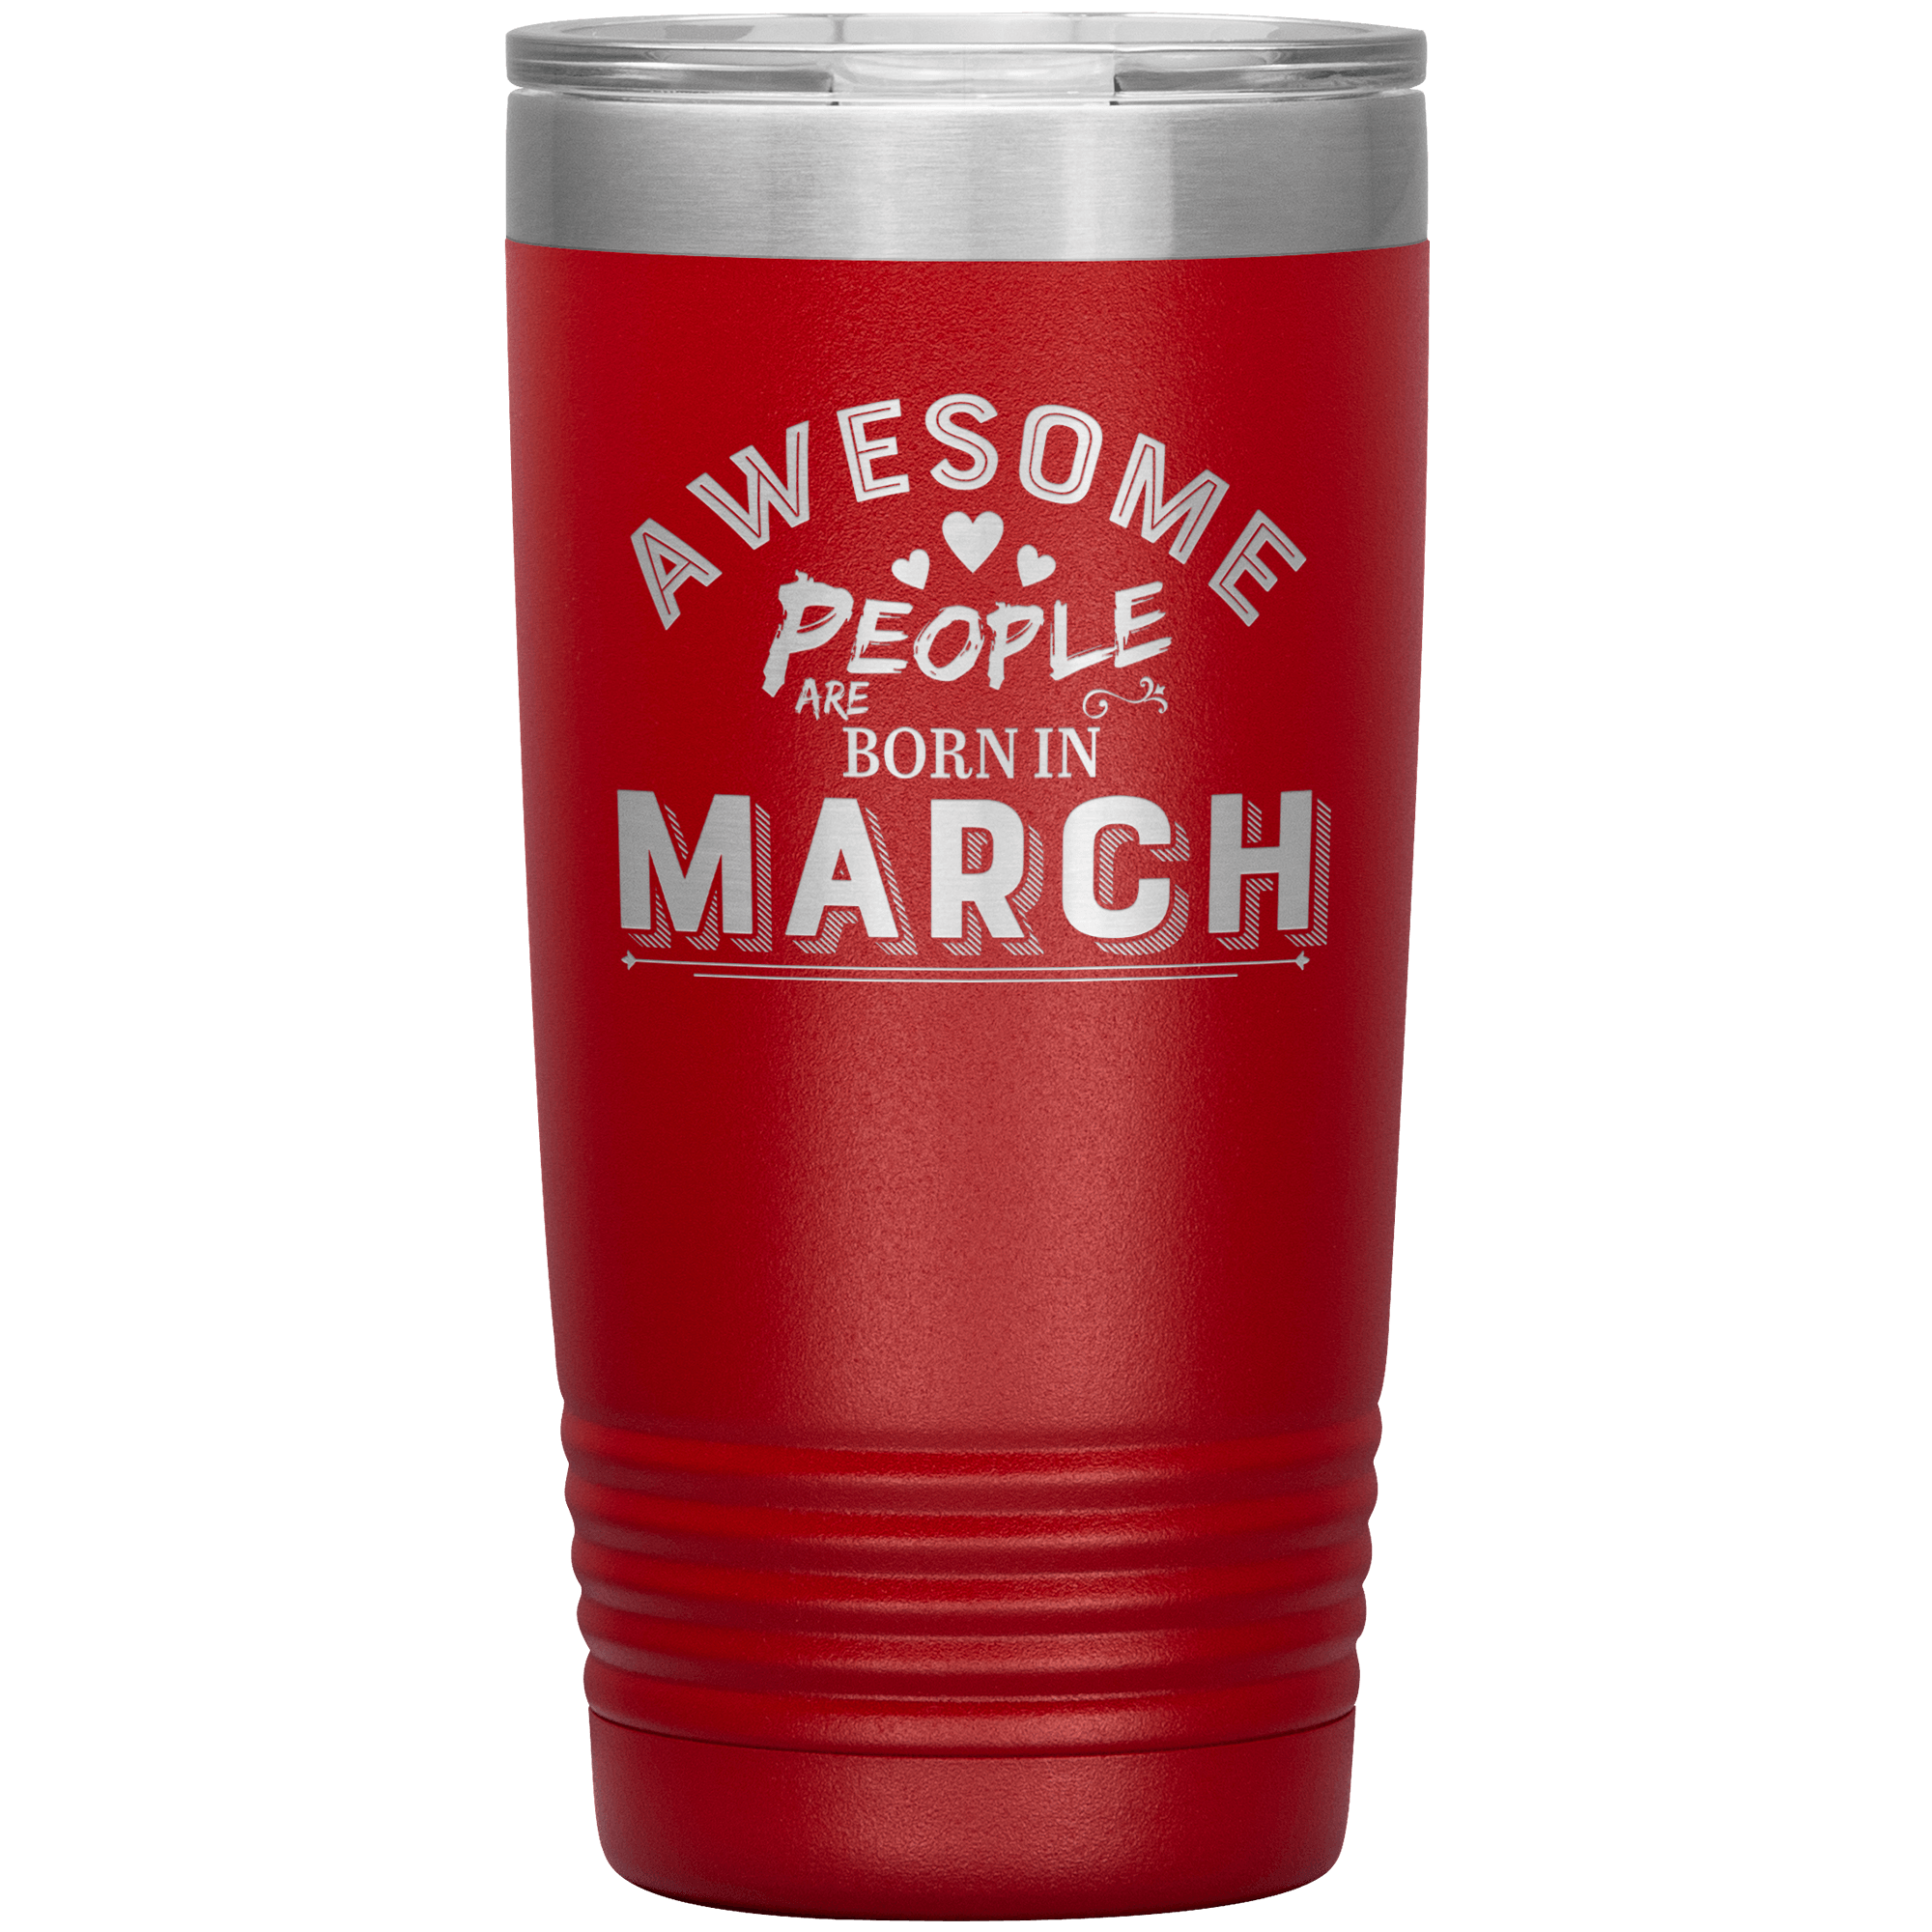 "AWESOME PEOPLE ARE BORN IN MARCH" Tumbler